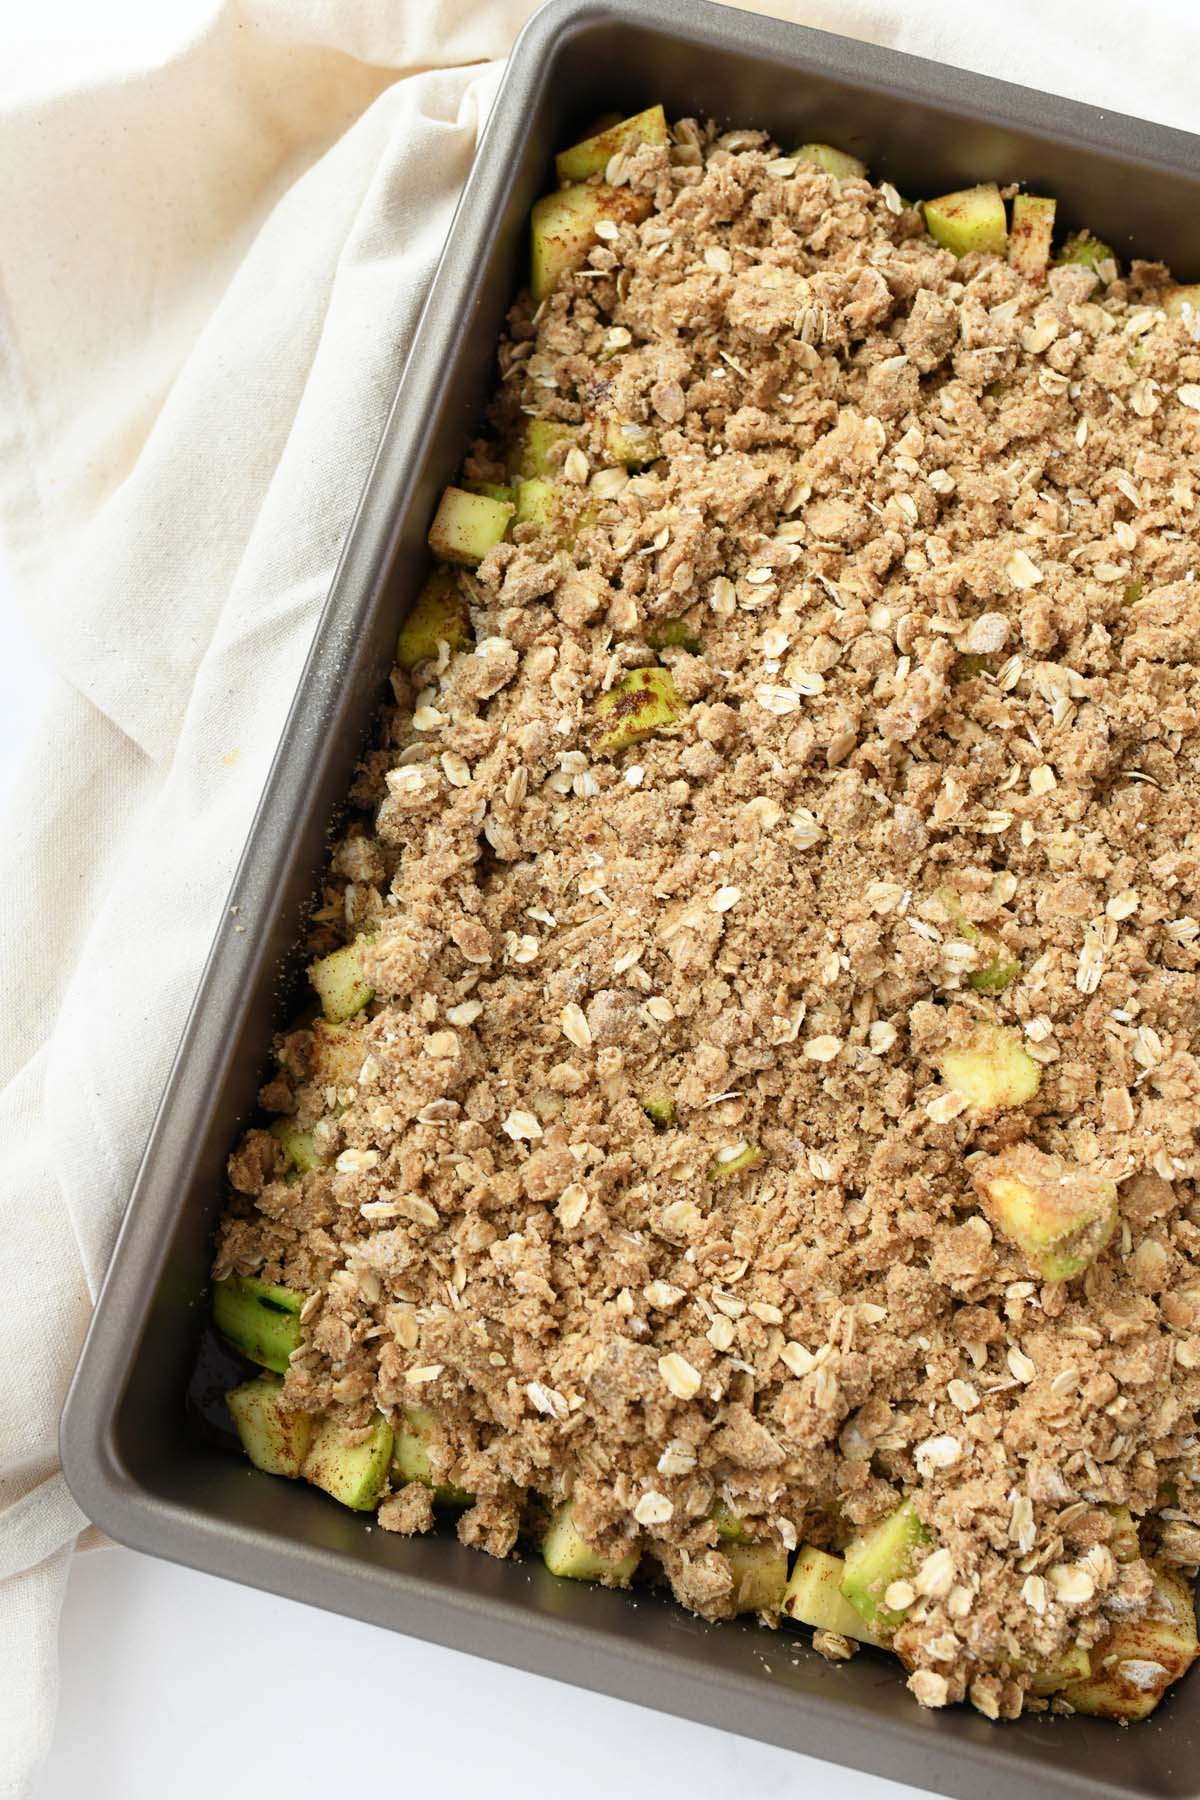 A pan of unbaked zucchini crisp.